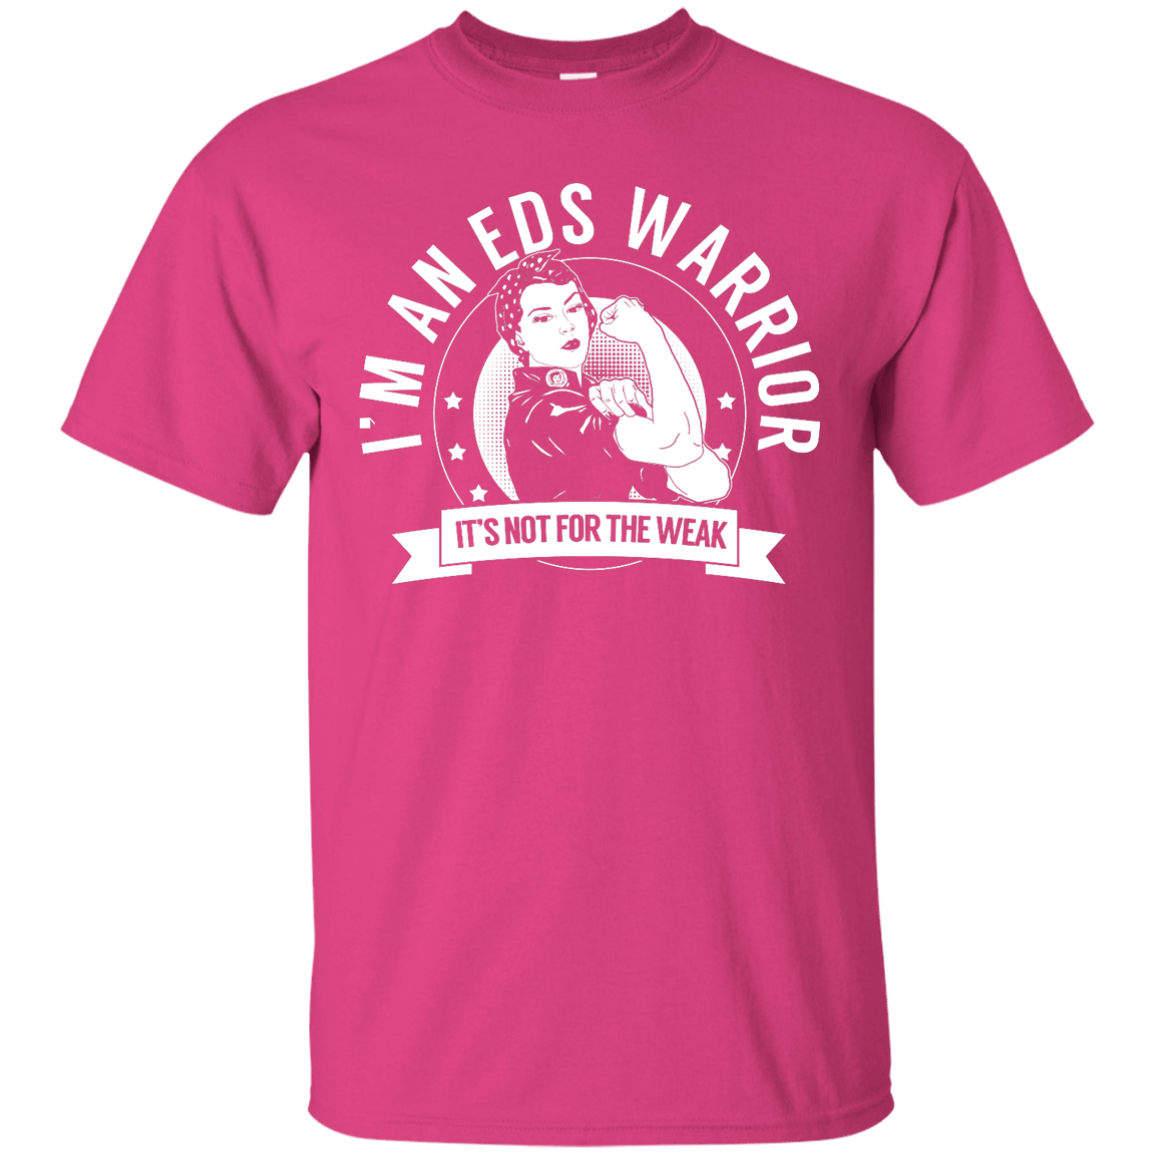 Ehlers Danlos Syndrome - EDS Warrior Not for the Weak Unisex Shirt - The Unchargeables